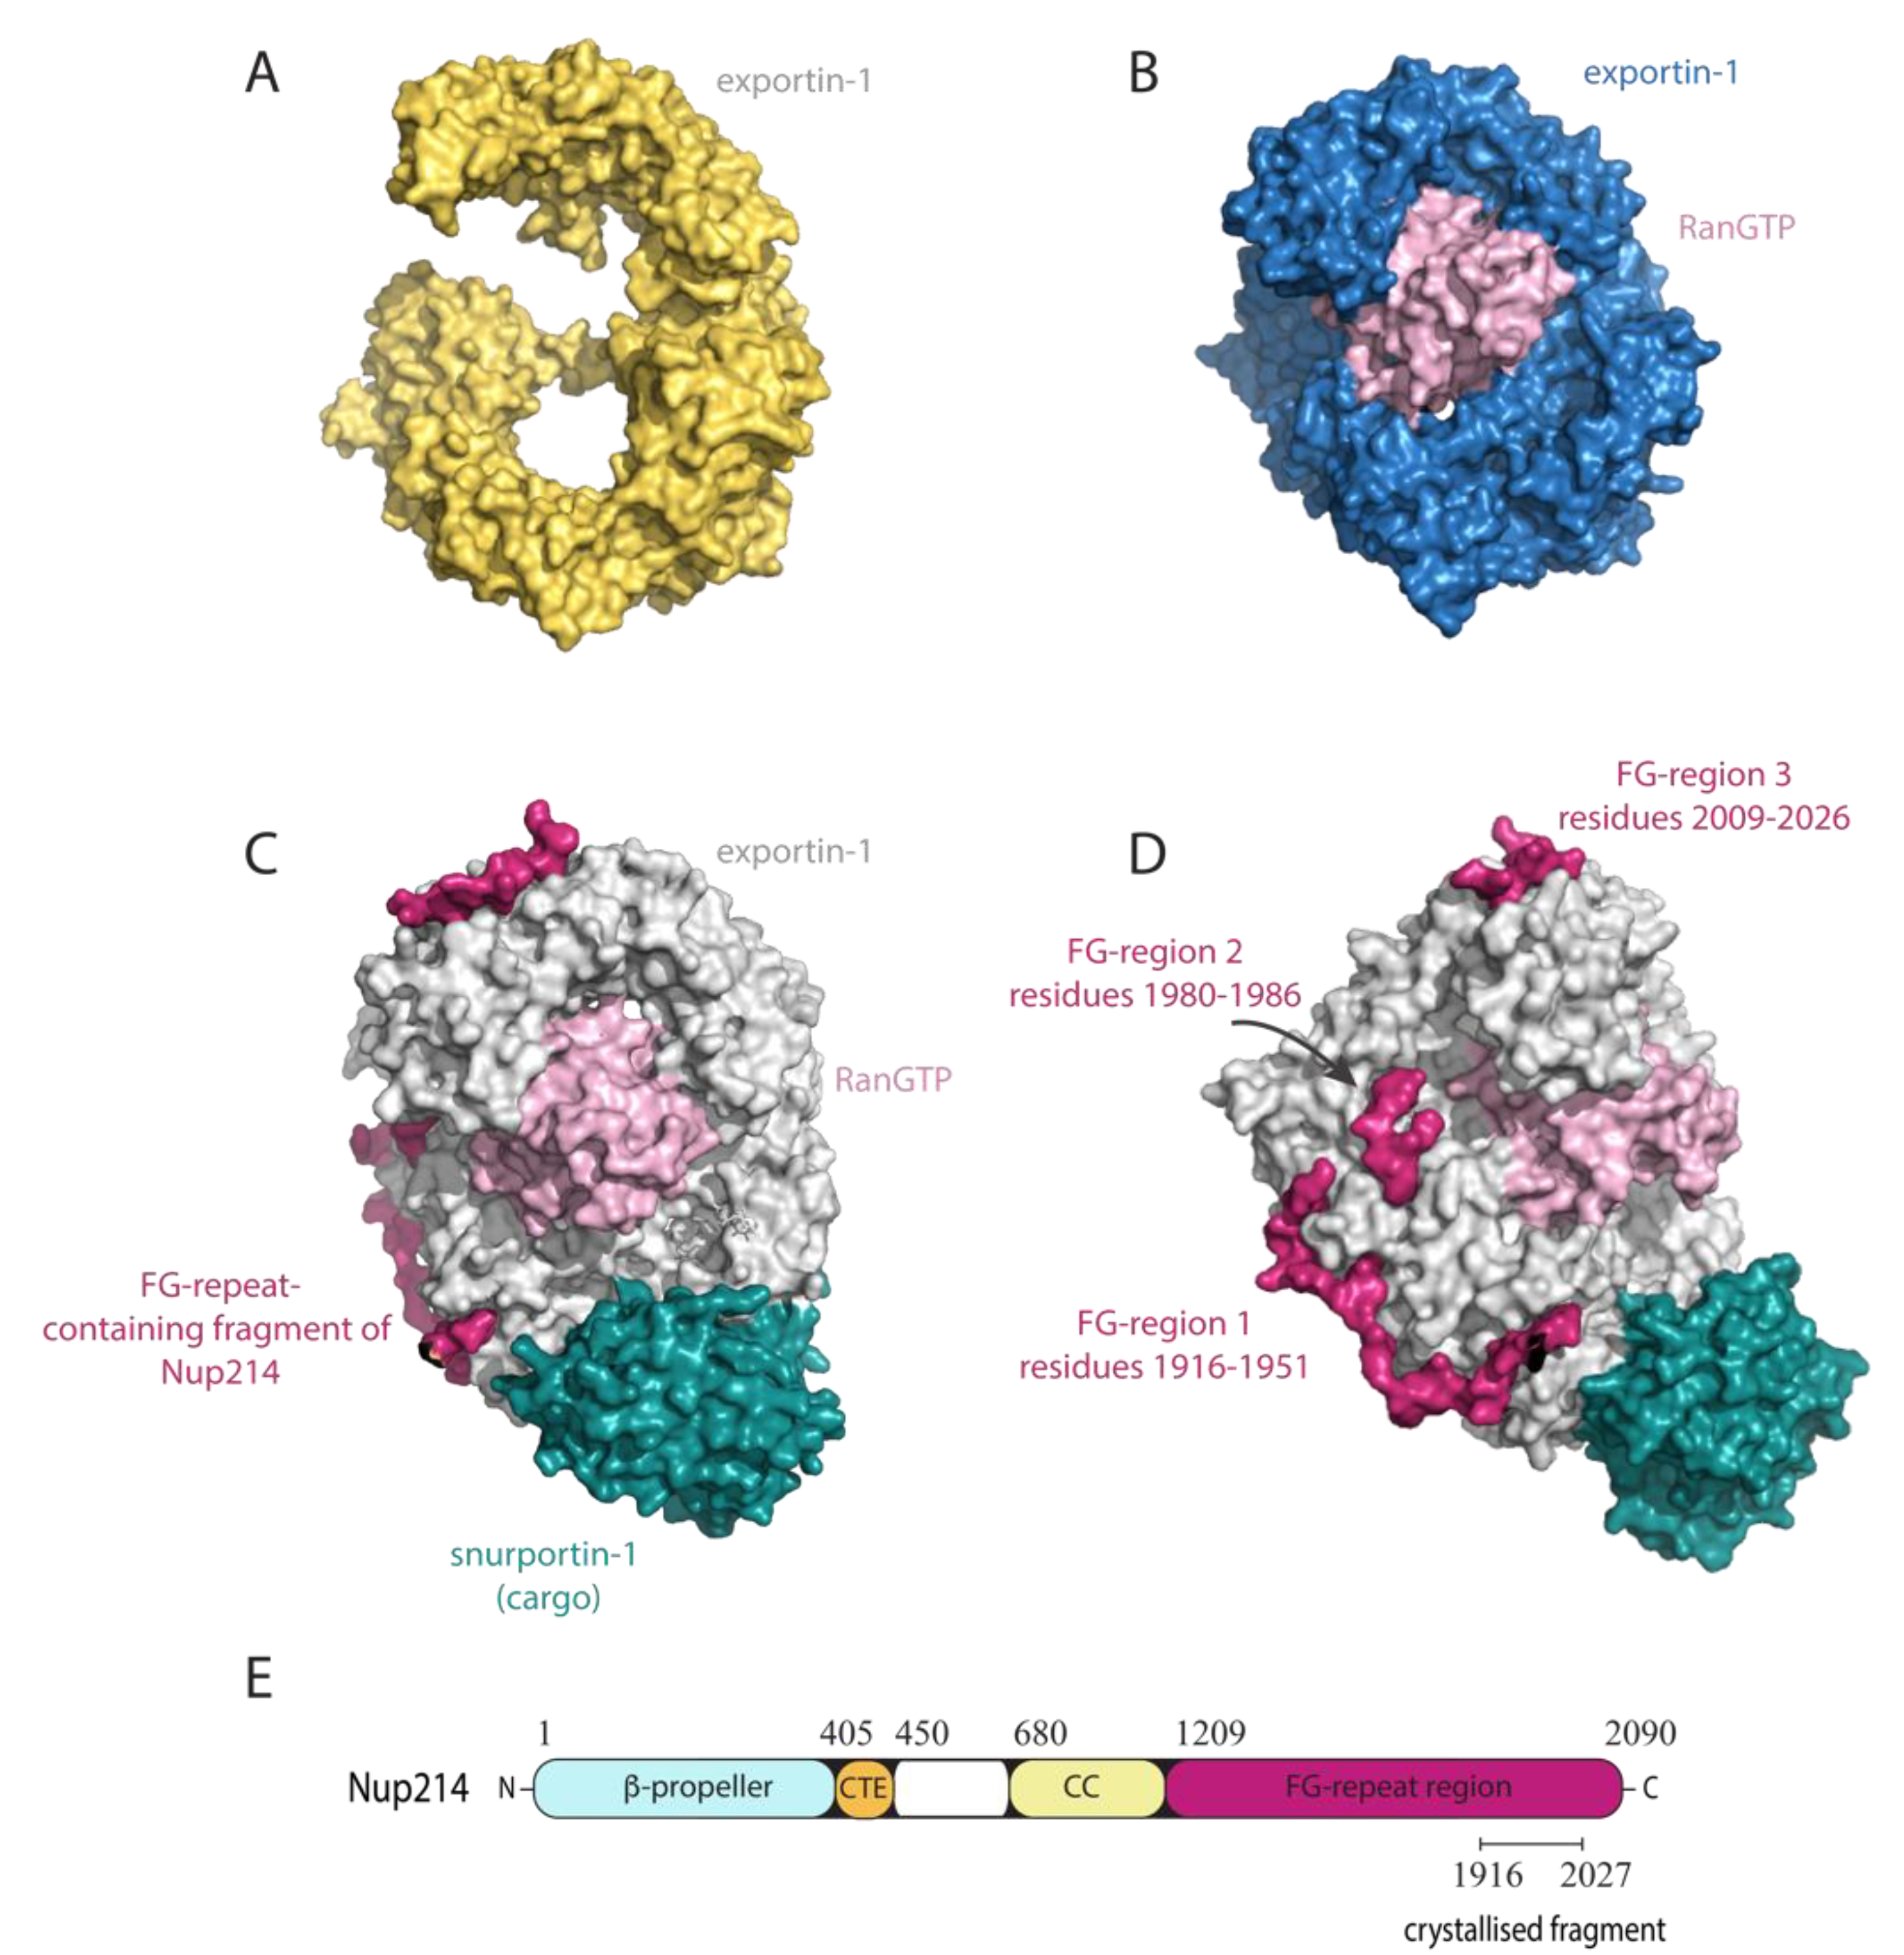 SPANX-A/D protein subfamily plays a key role in nuclear